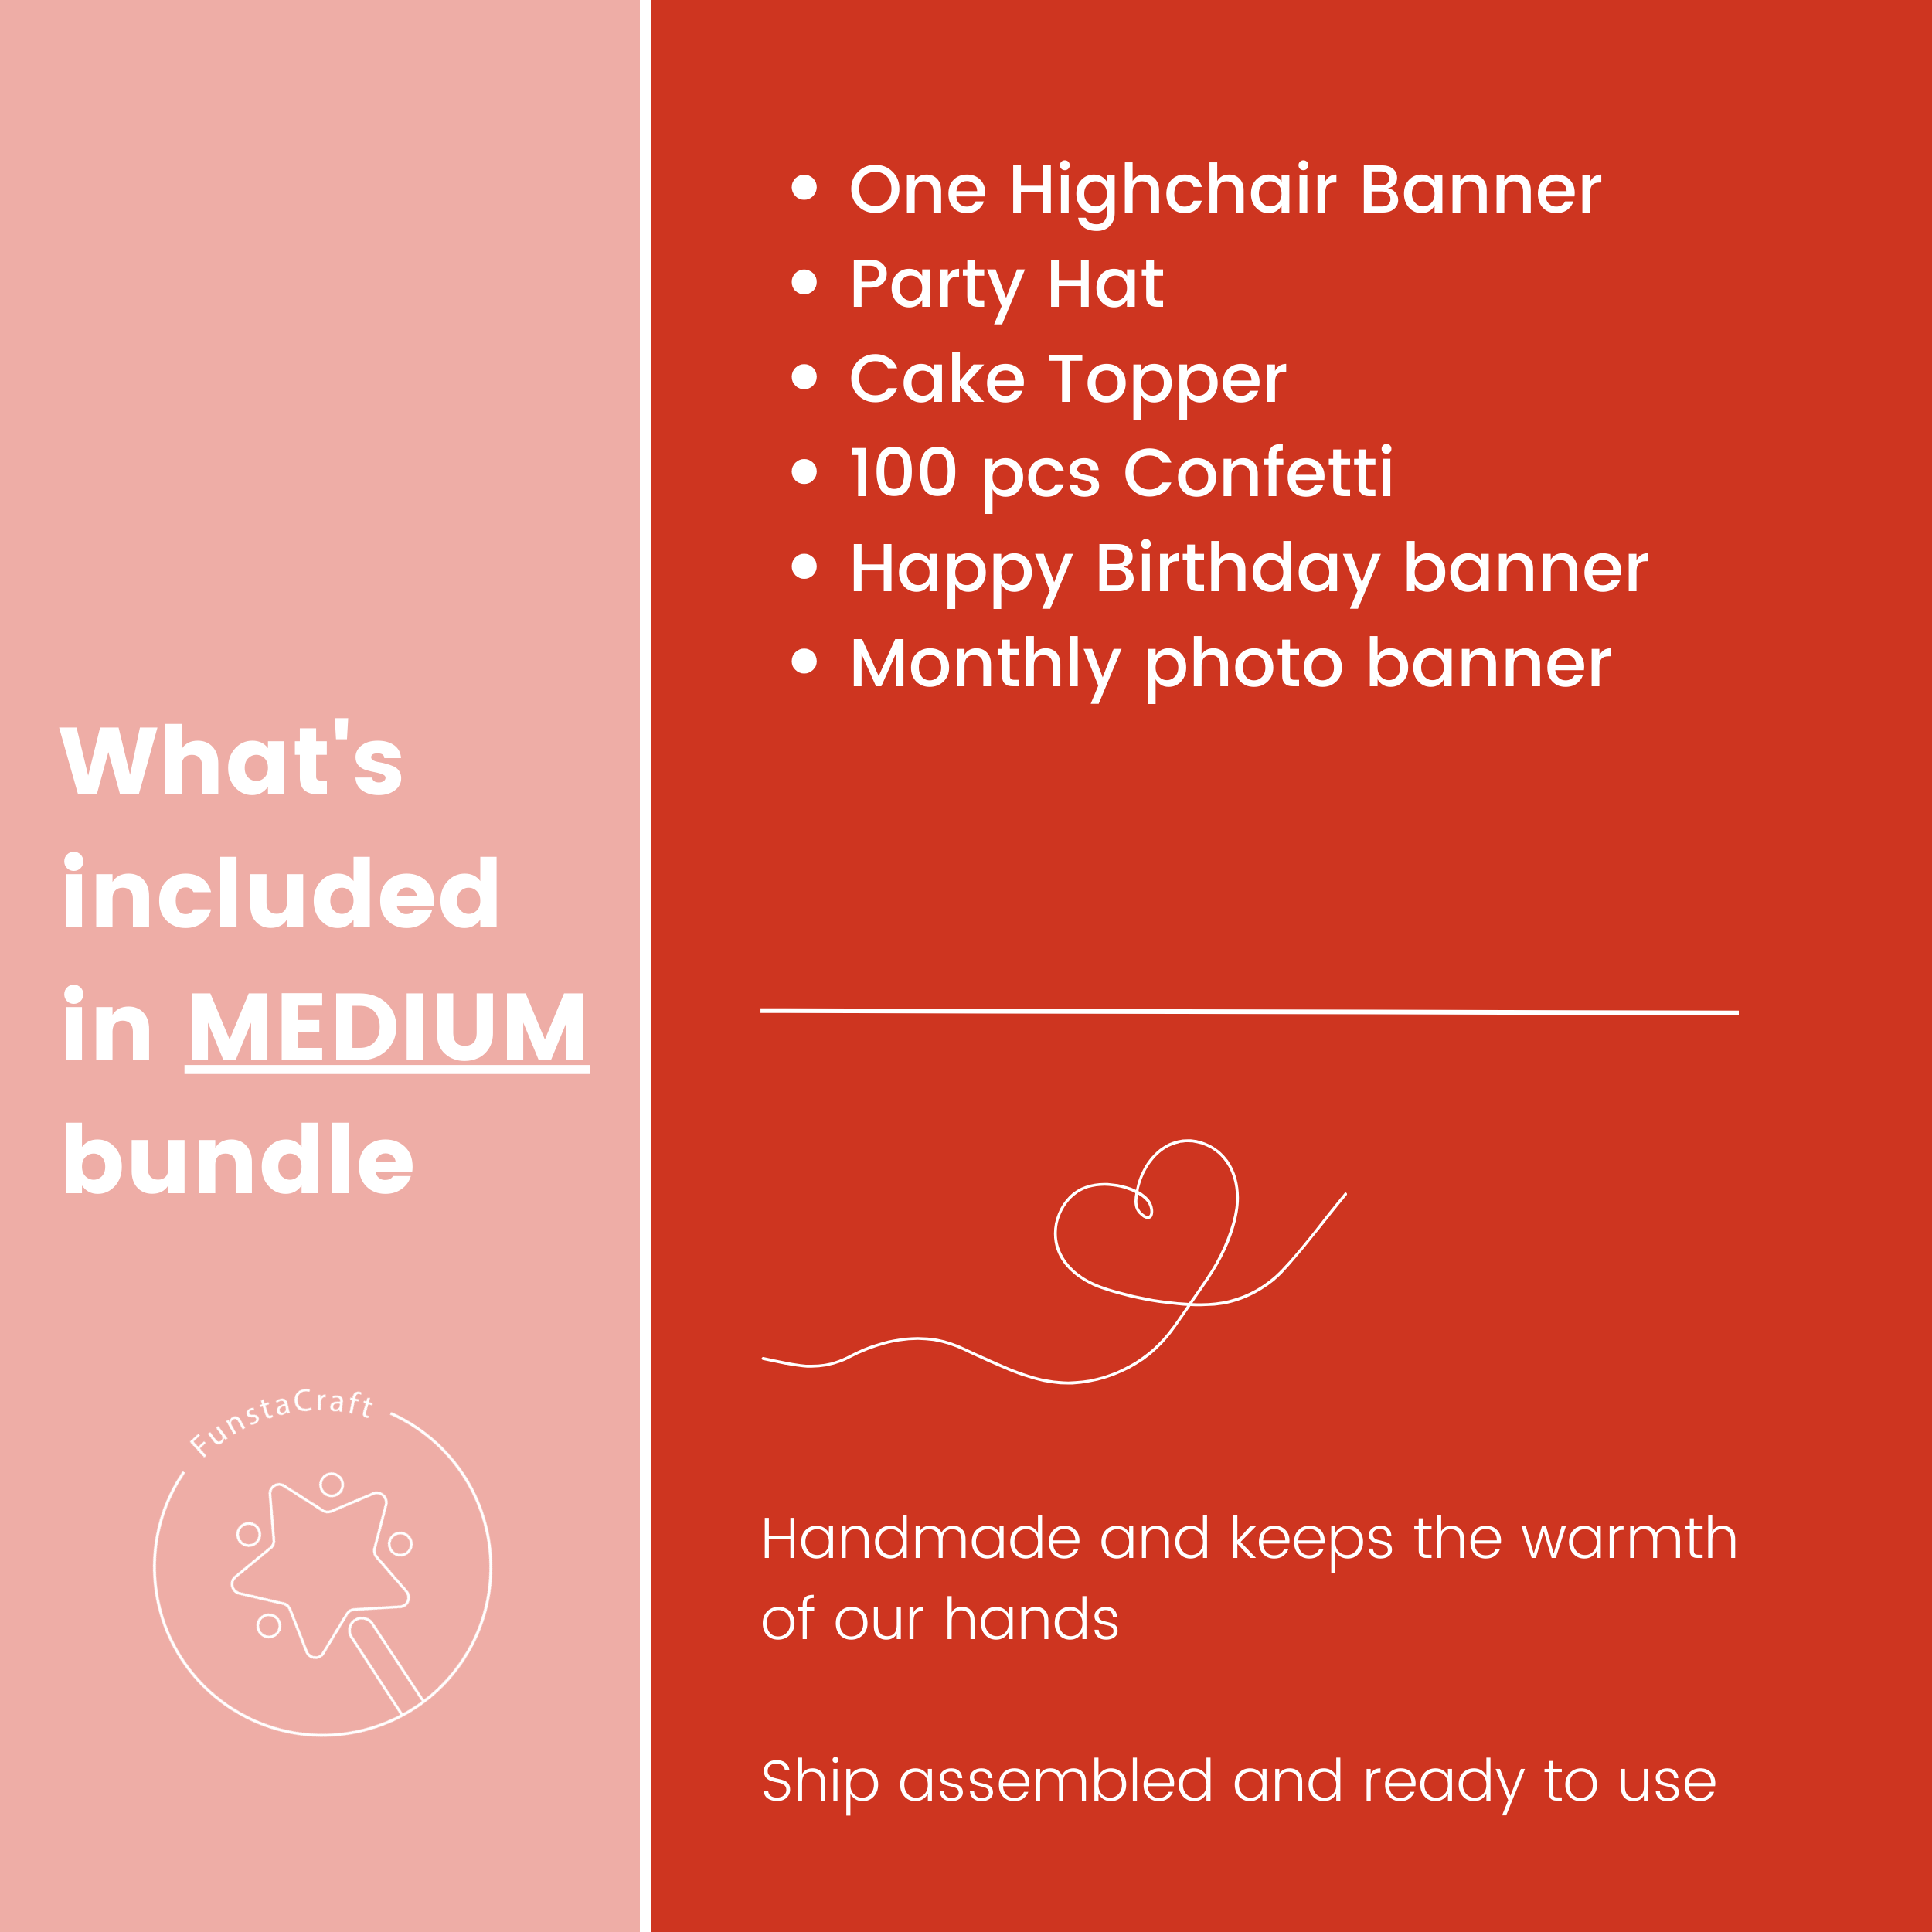 Wat's included in Large bundle